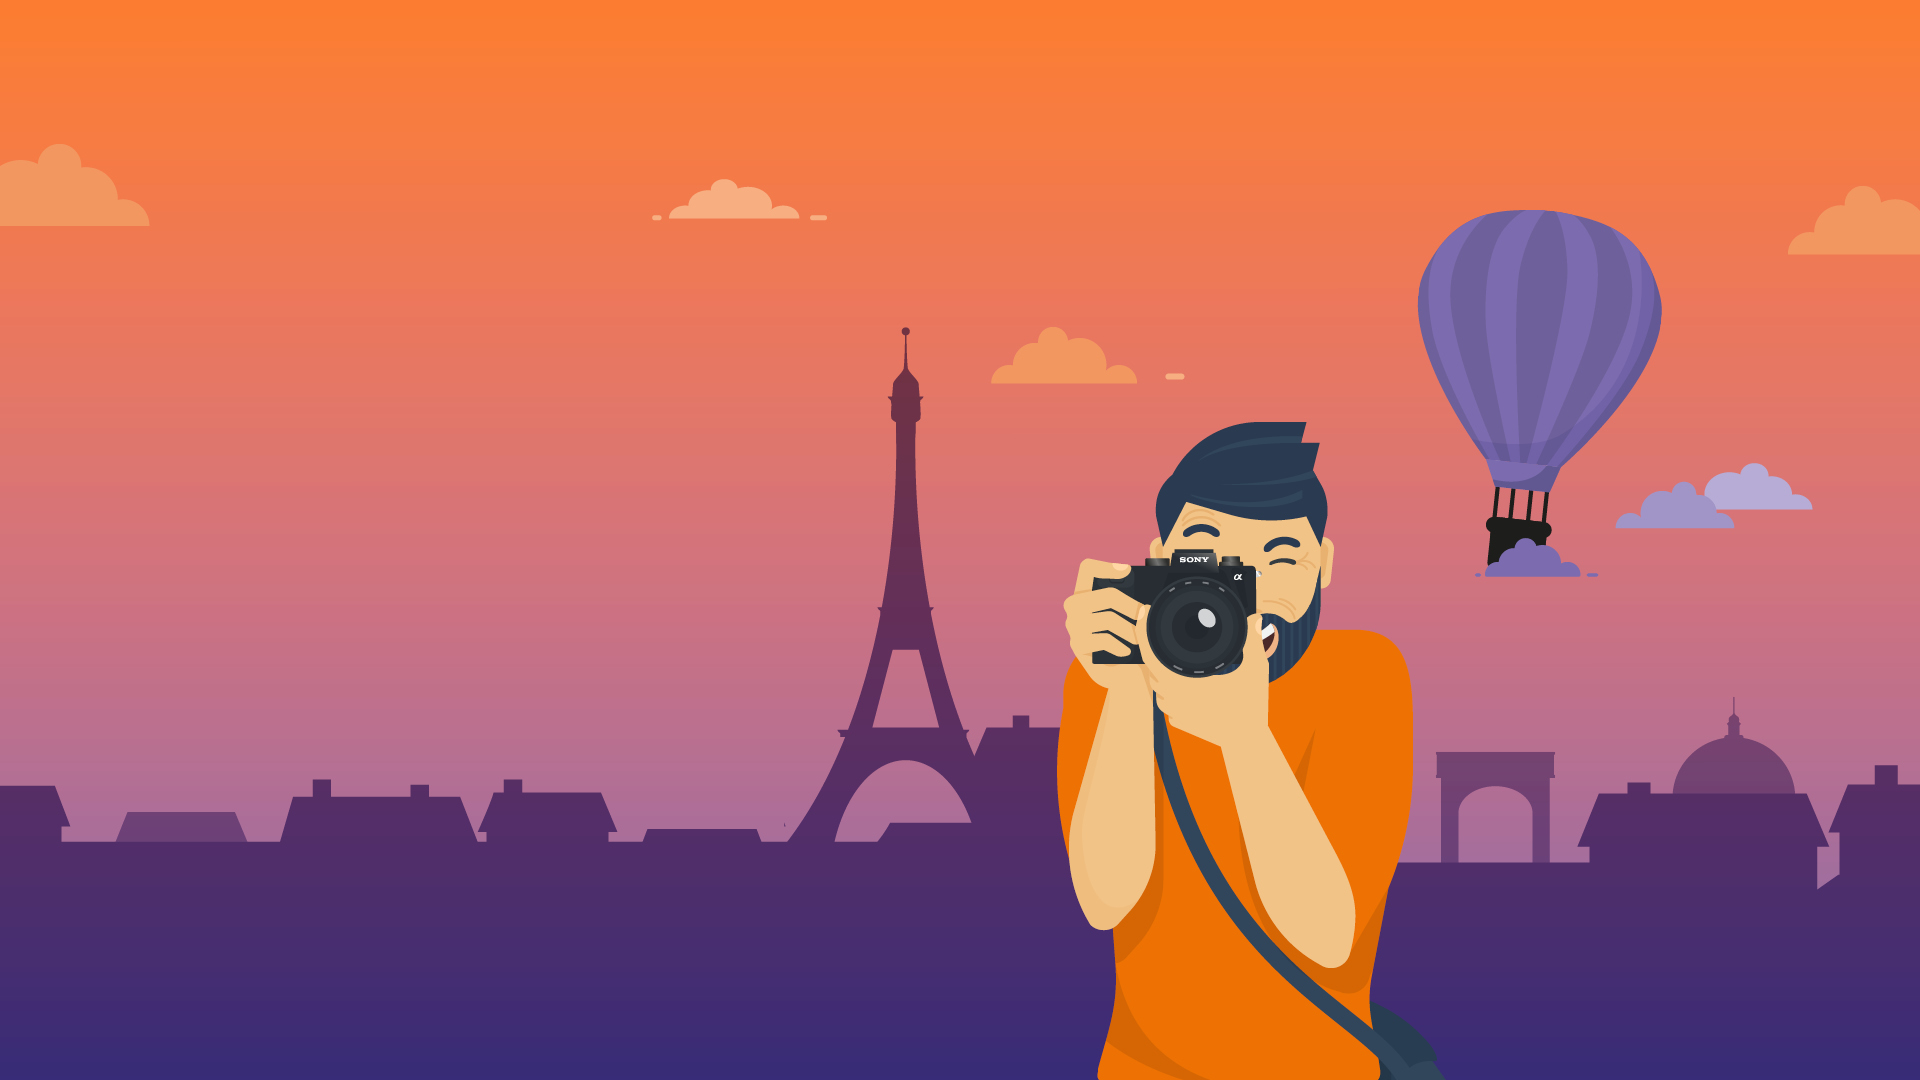 Attend & win a trip to Paris with Sony!